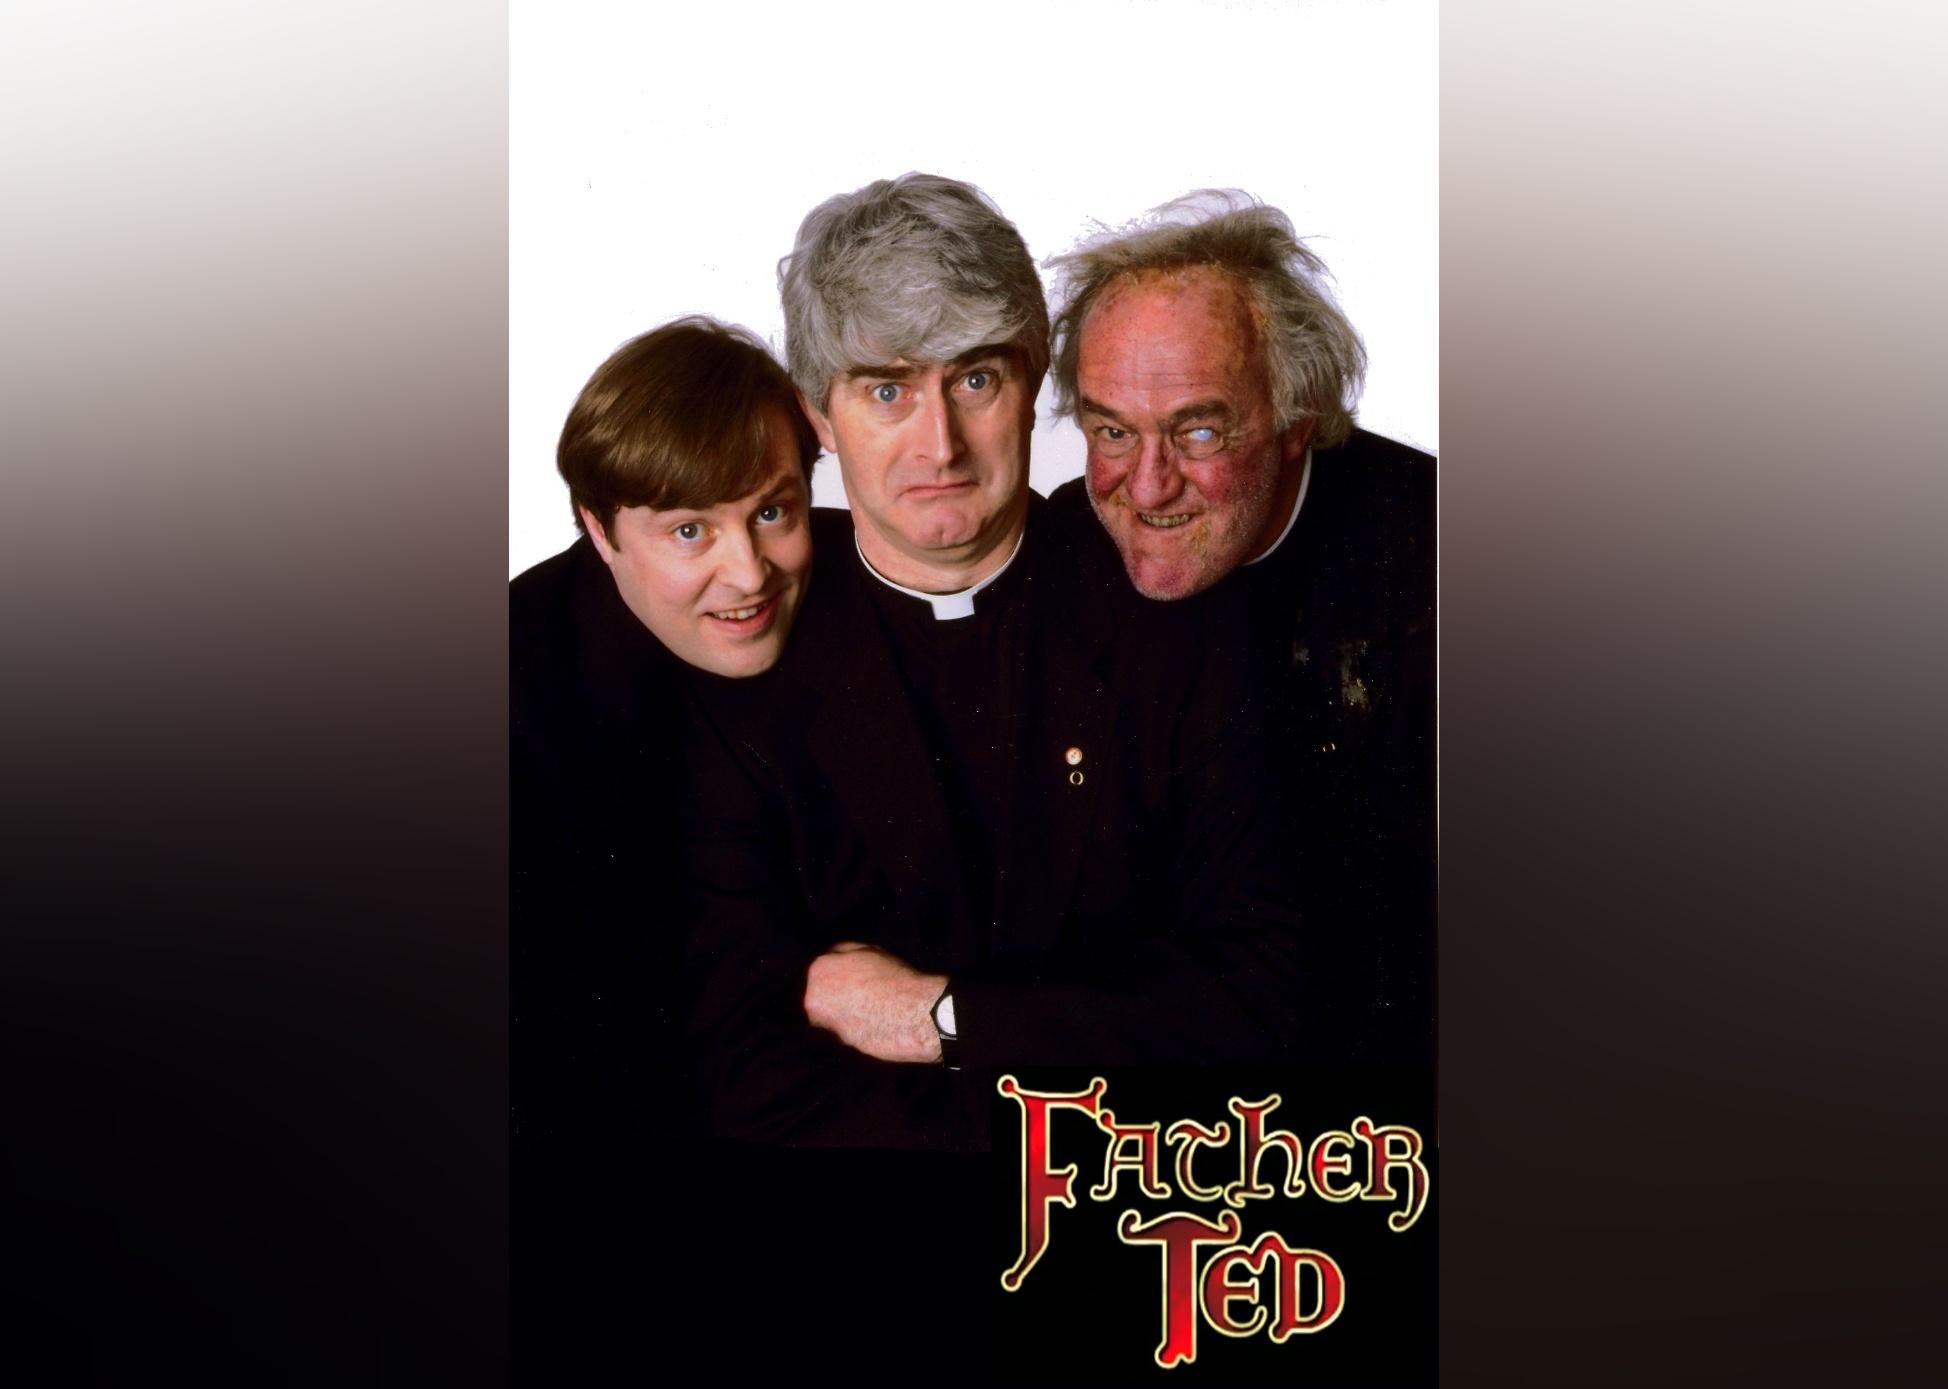 Three men on the TV poster for Father Ted.